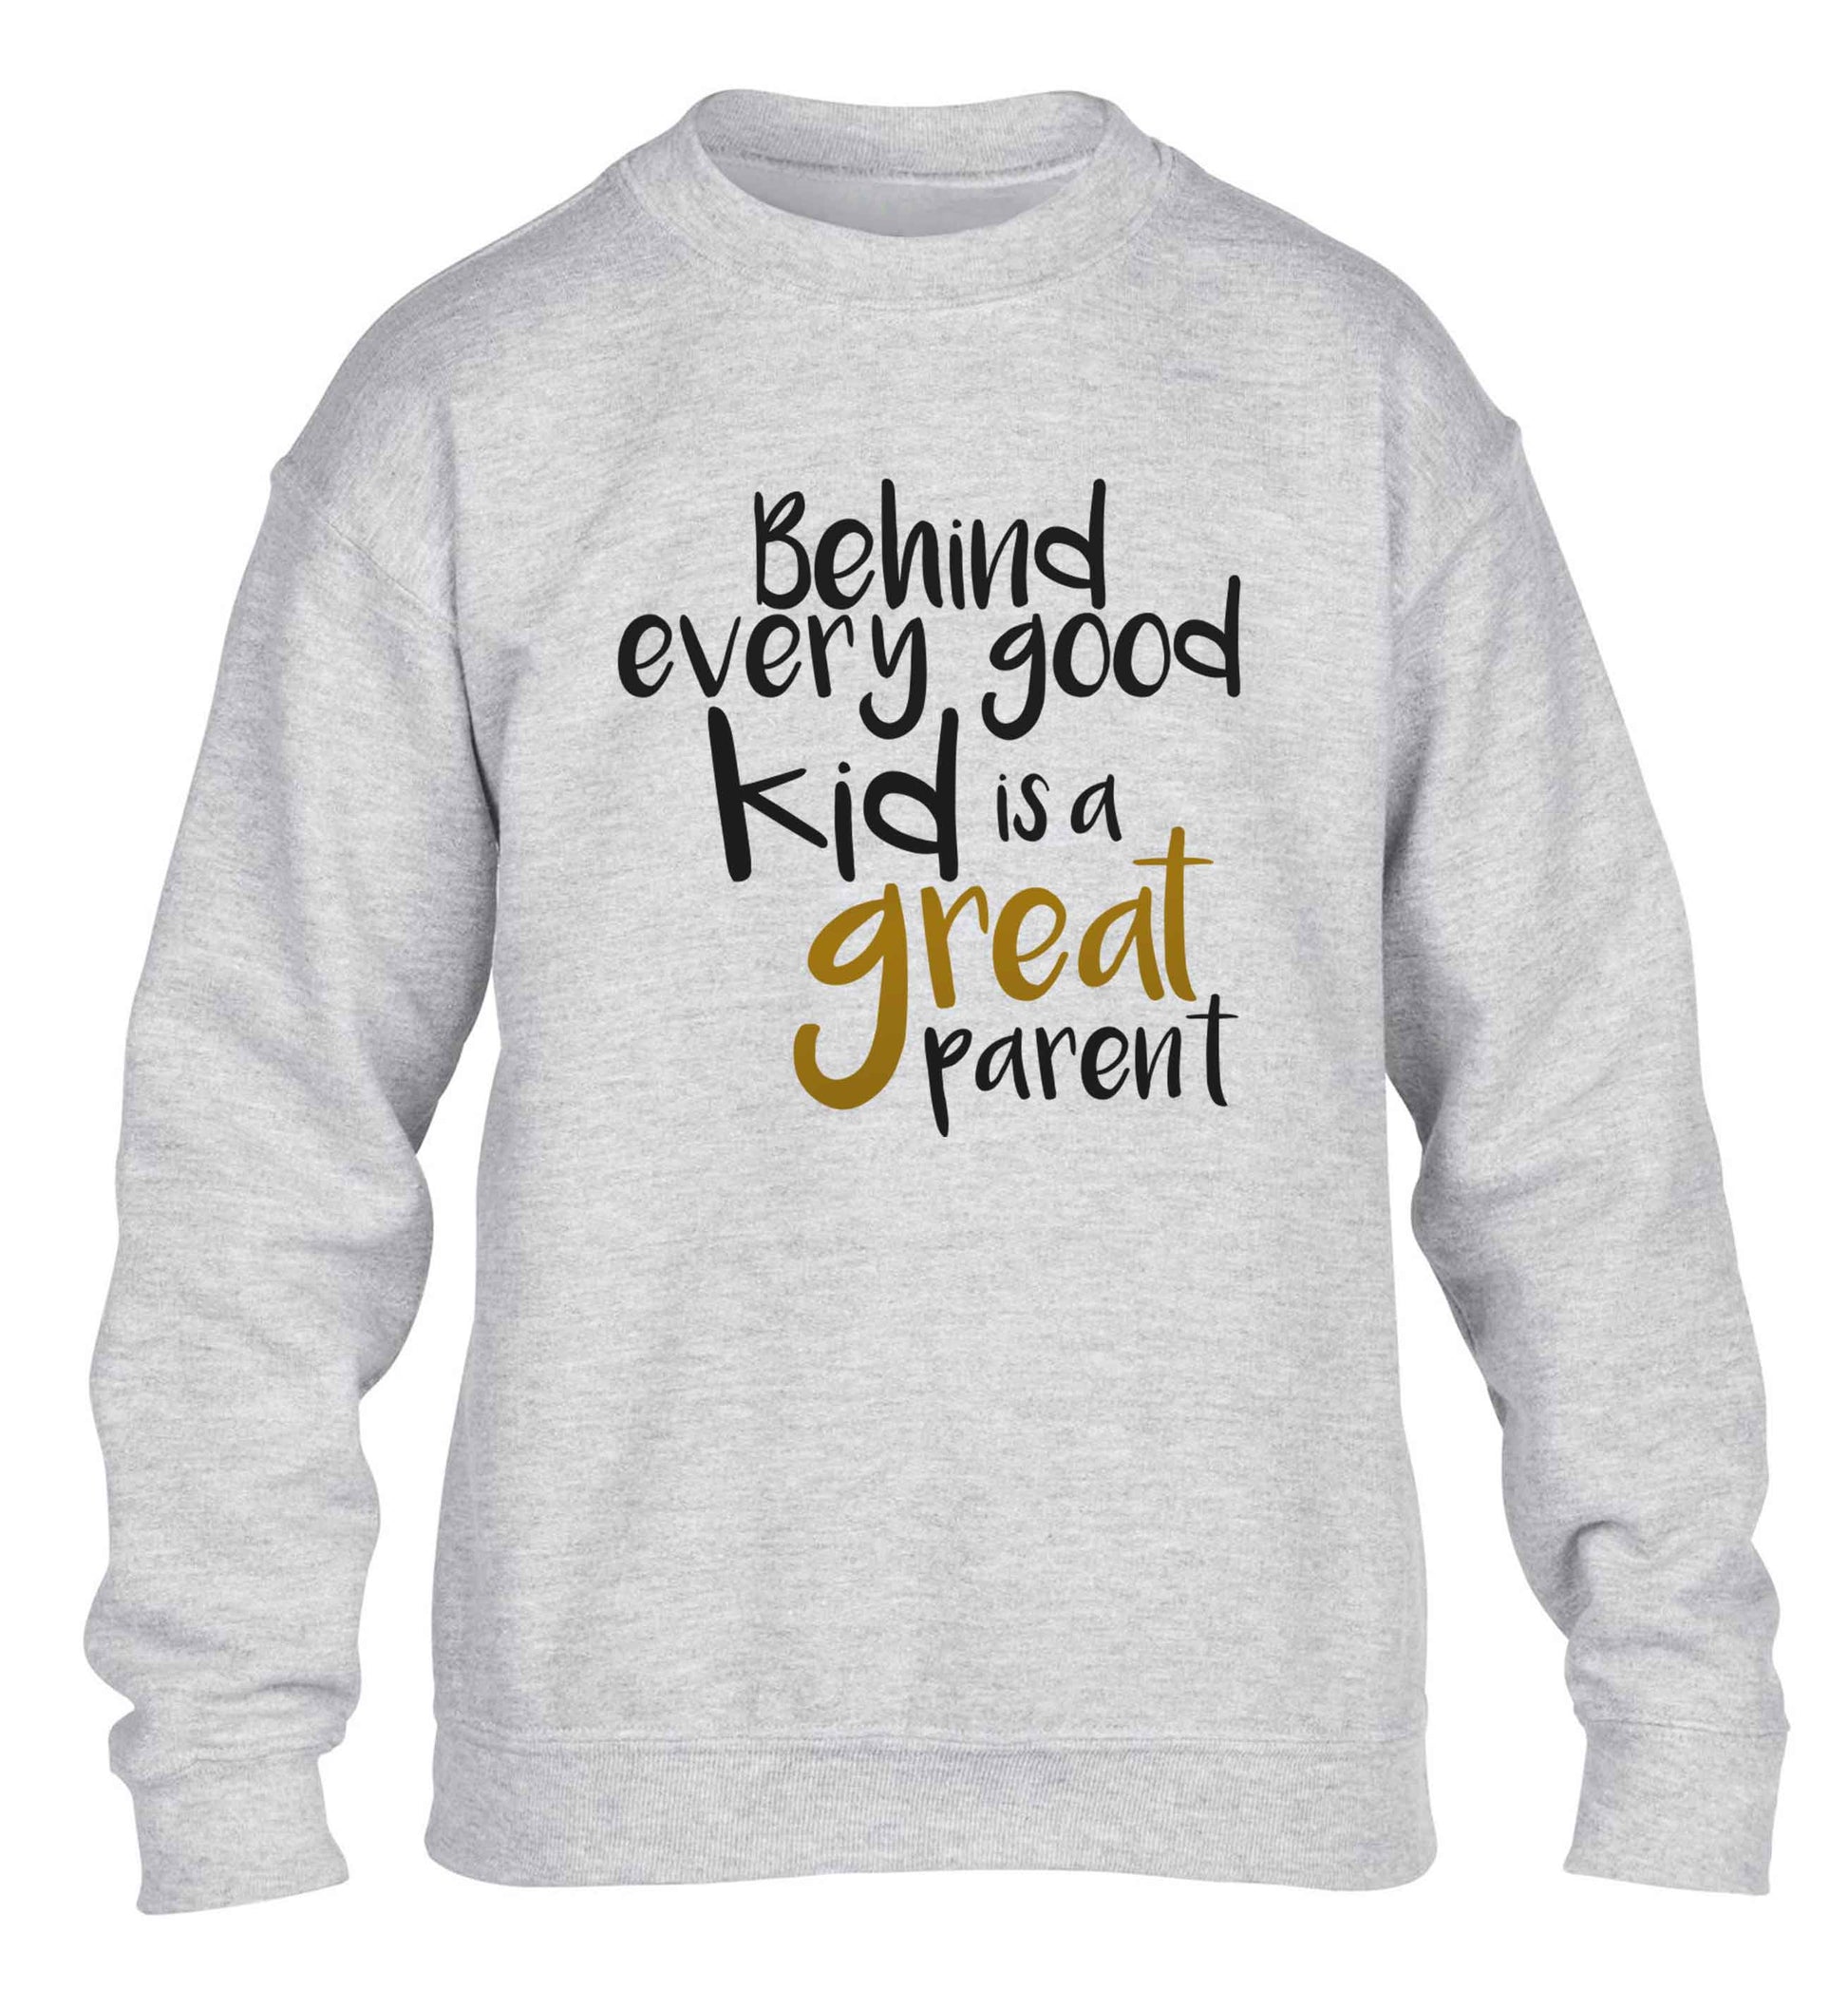 Behind every good kid is a great parent children's grey sweater 12-13 Years